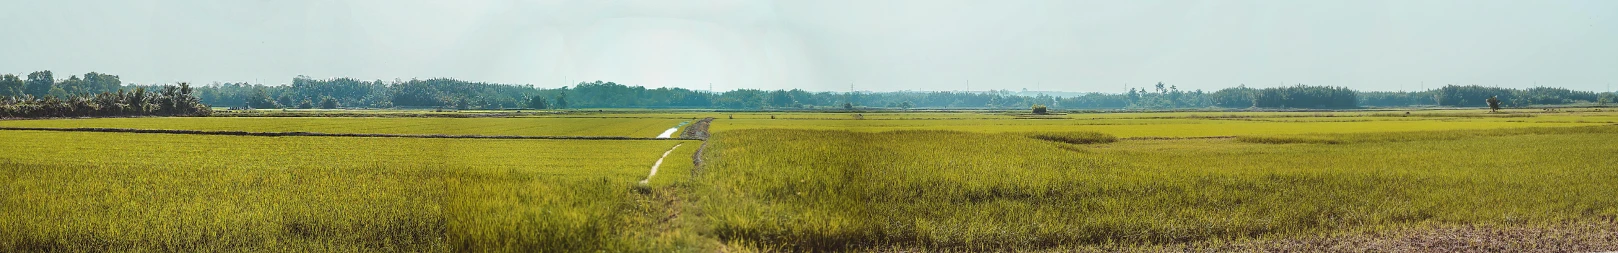 a field with a fence in the middle of it, a picture, unsplash, sumatraism, rice, panoramic widescreen view, runway, bangladesh